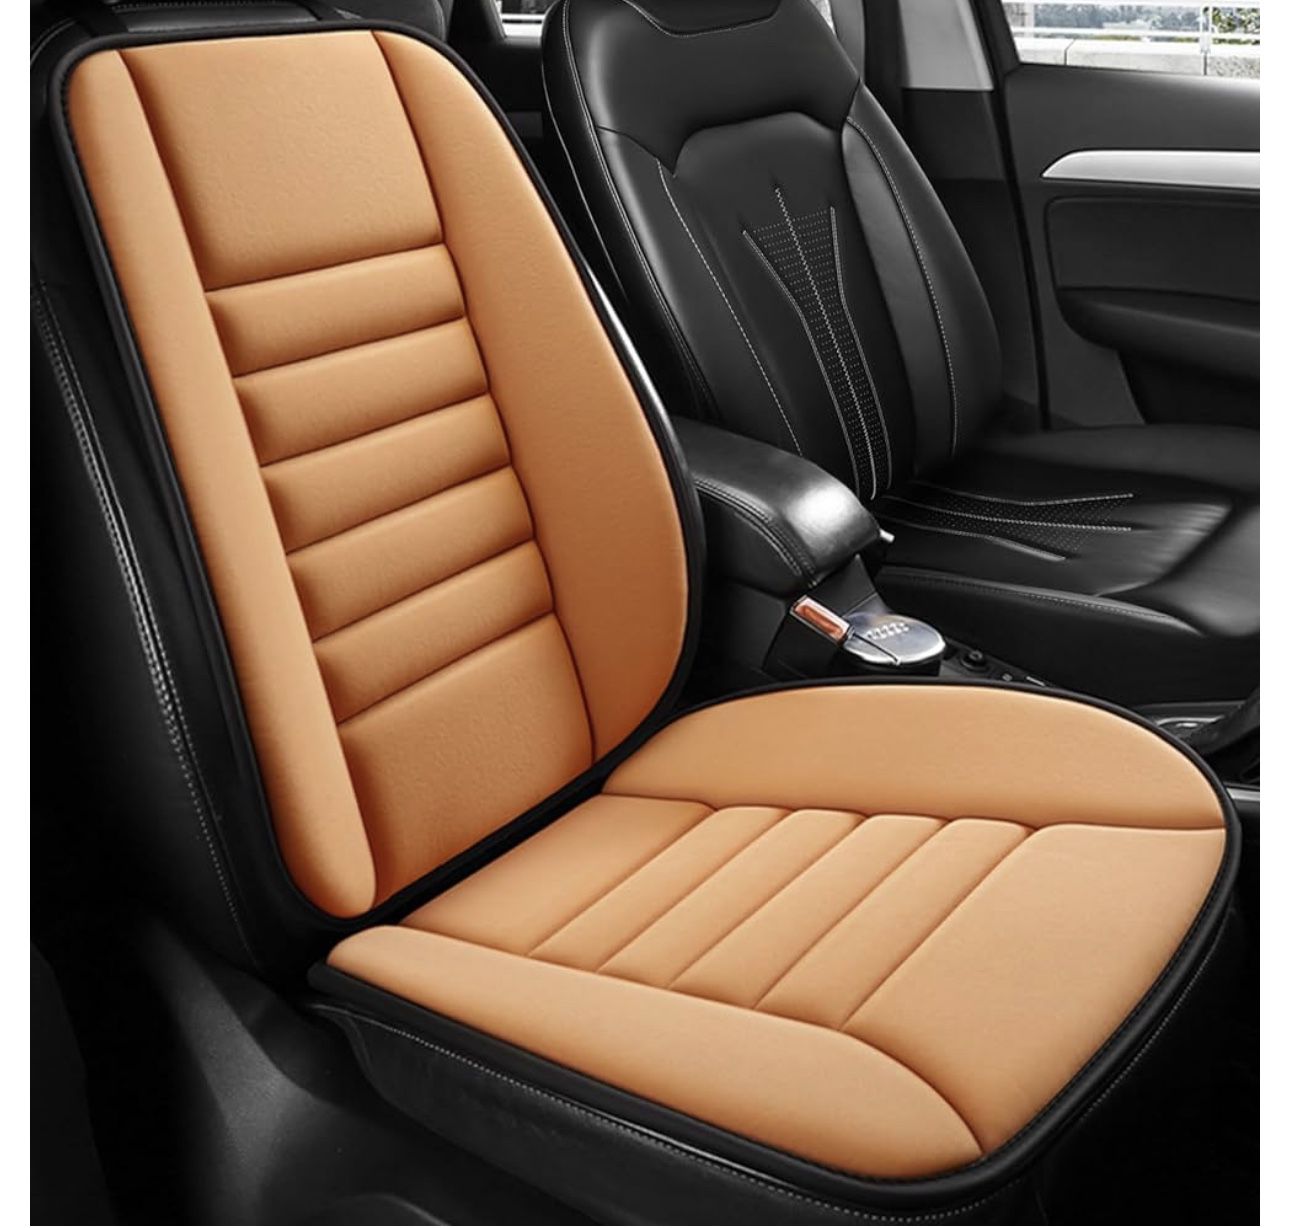 MYFAMIREA Car Seat Cushion and Lumbar Support Pillow Memory Foam Desk Chair Cushion Back Support for Automotive Seat Driver, Travel, Office, Leg and B